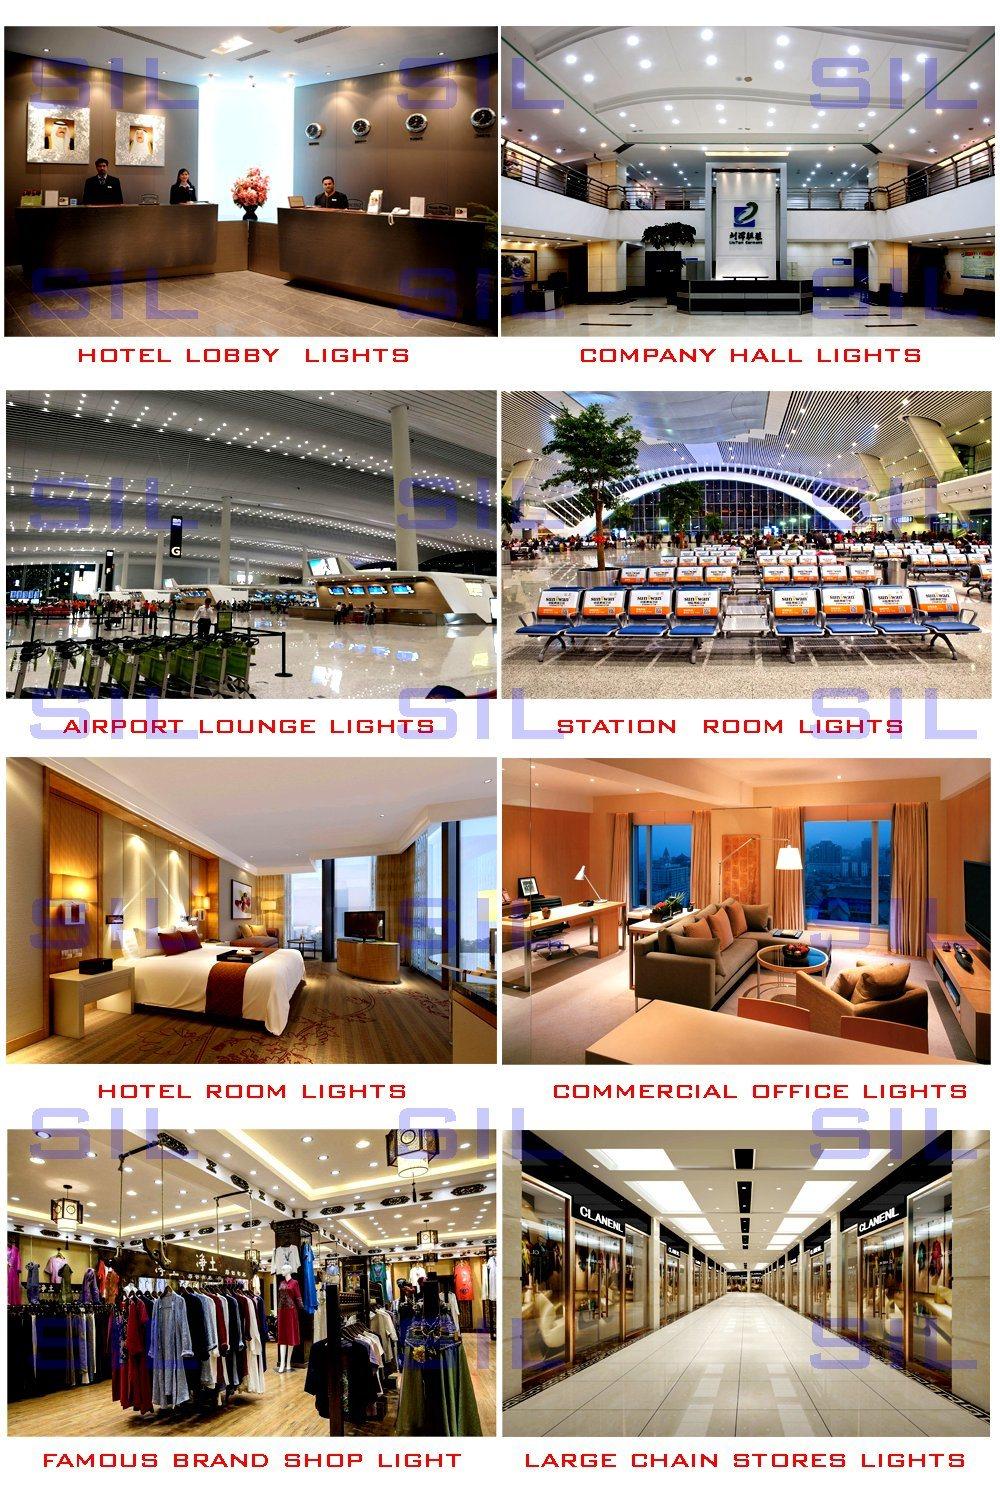 Hot Sales Hotel Commercial LED Down Light 10W 15W 20W 25W 30W 40W Ceiling Light 40W LED Down Light